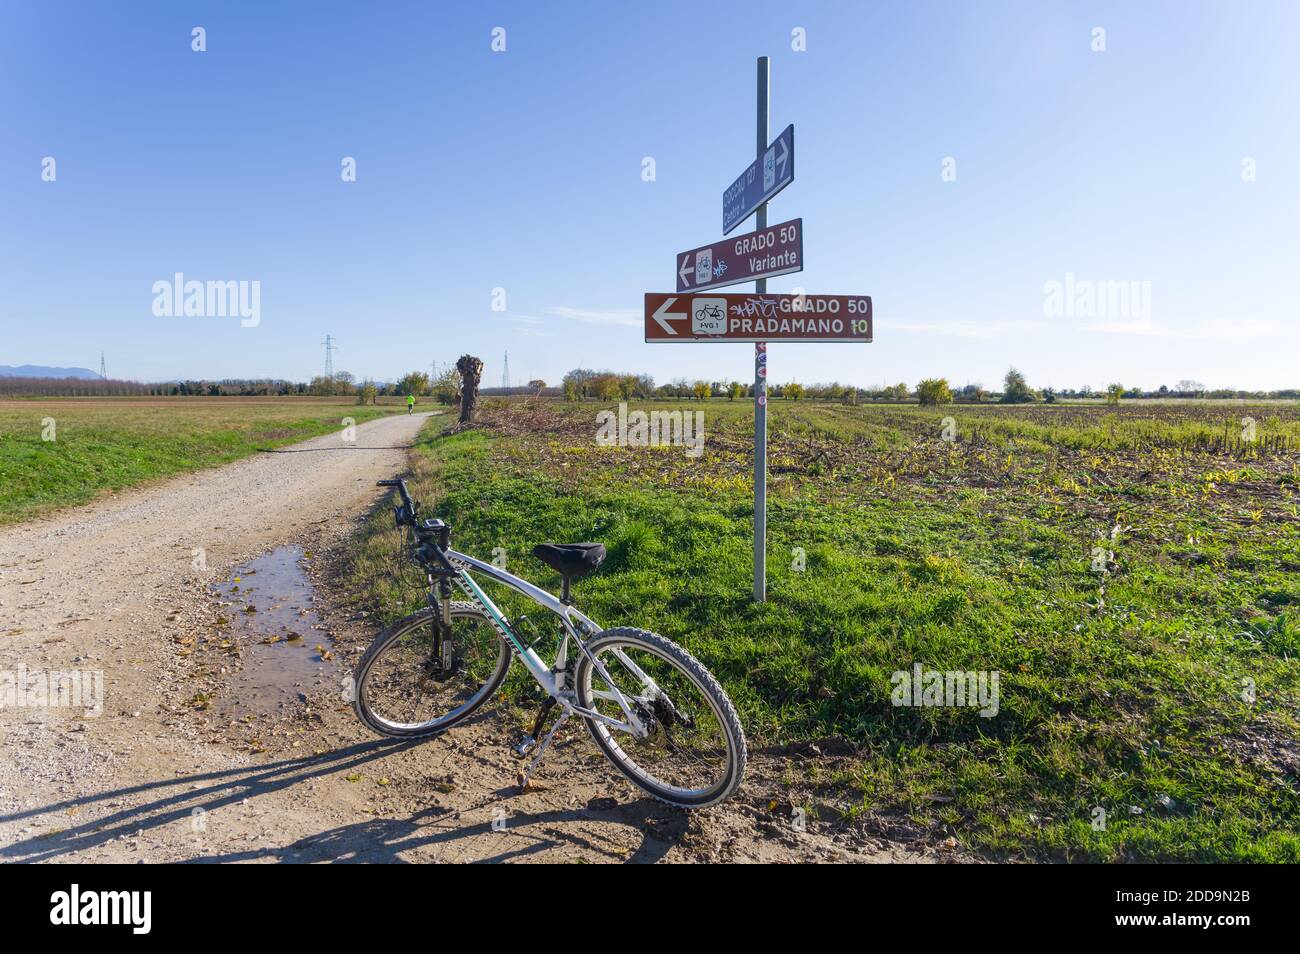 Udine, Italy (21st November 2020) - A cross-road of the Alpe Adria cycle-way connecting Salzburg in Austria and Grado in Italy Stock Photo